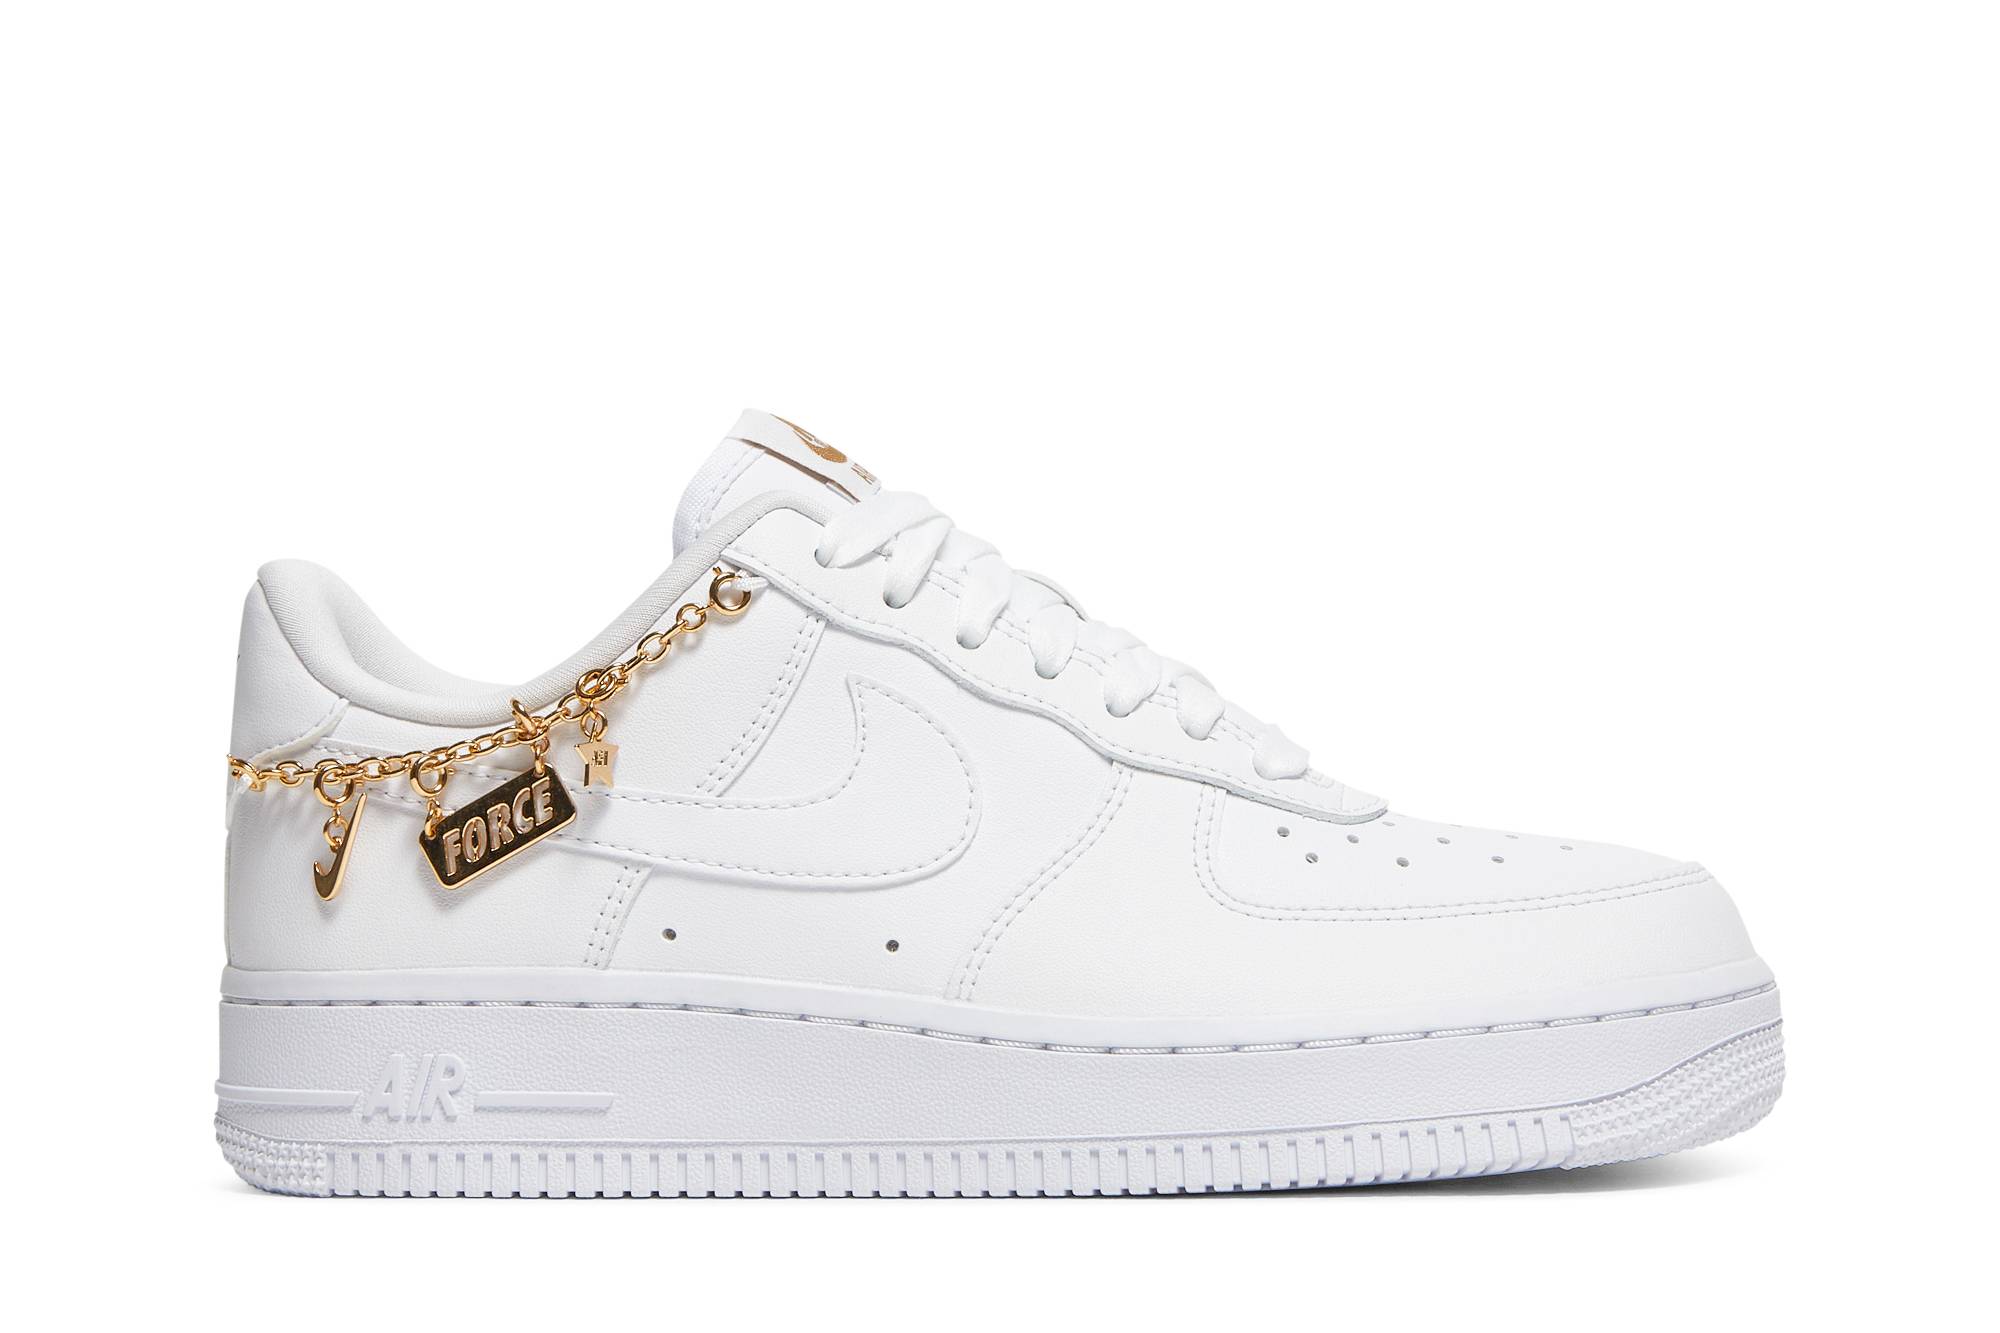 Women's Nike Air Force 1 Low LX - Lucky Charms White